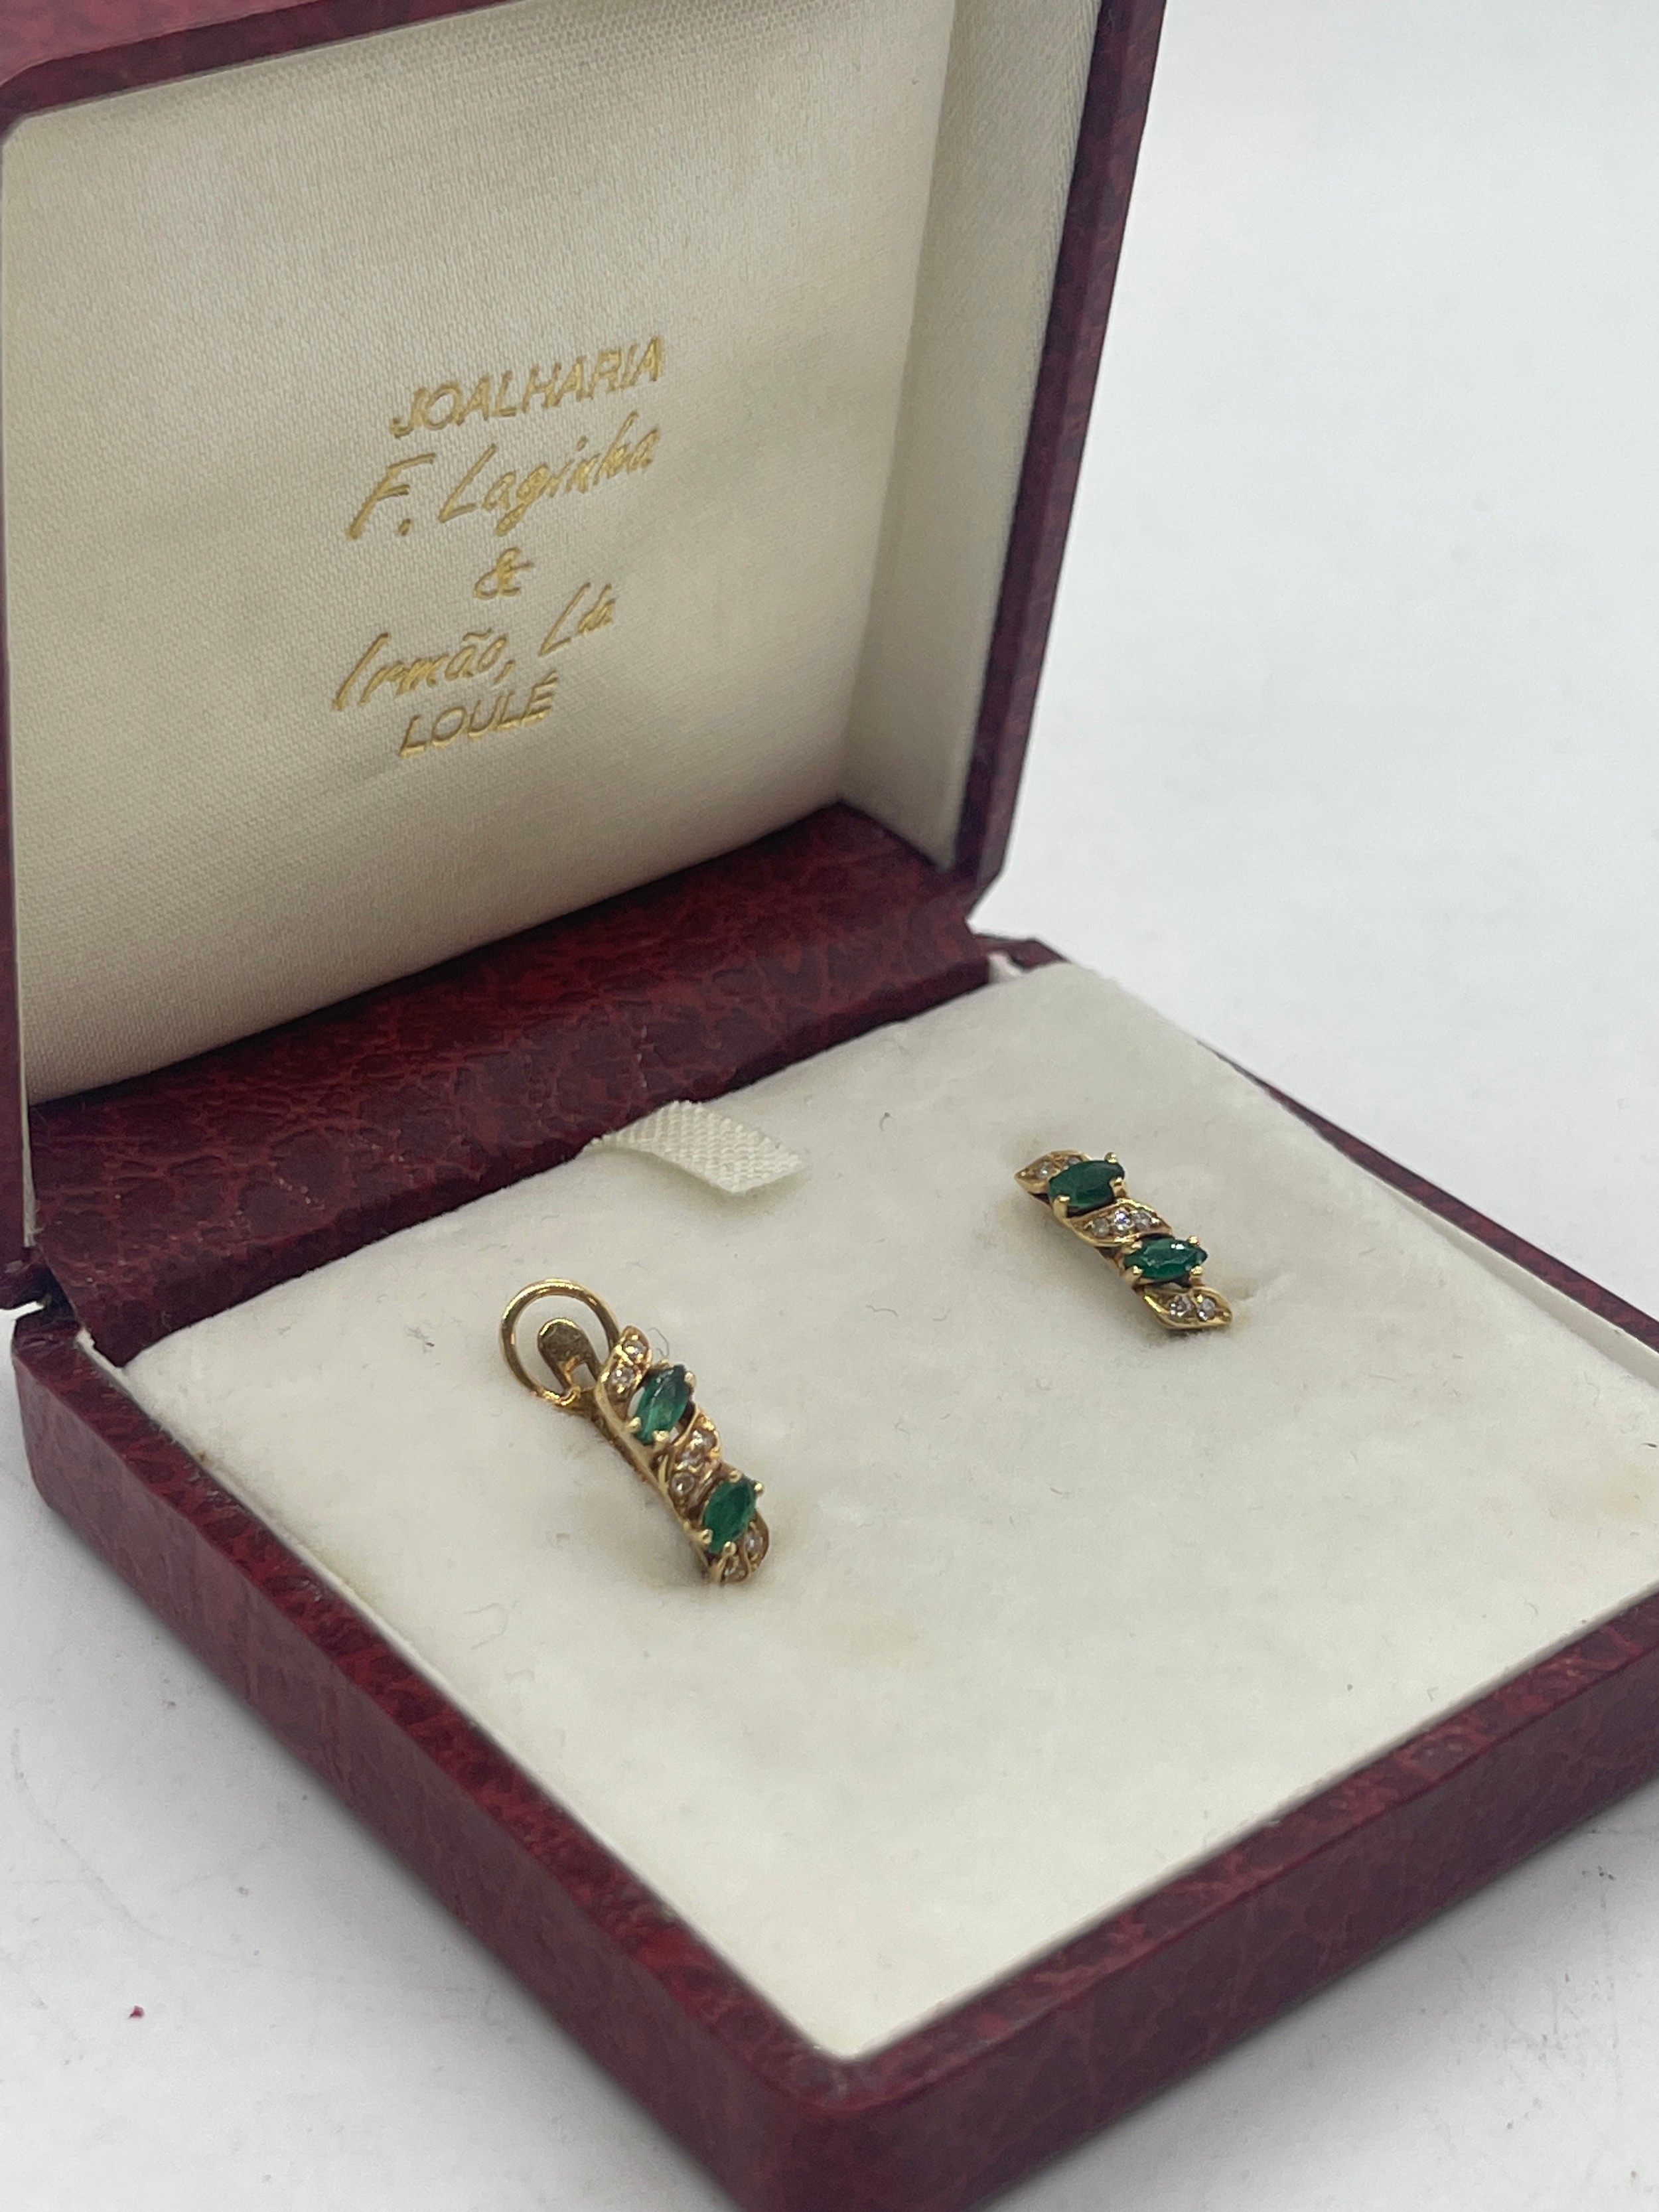 Pair of 18ct diamond and emerald earrings 2.9 grams - Image 7 of 7